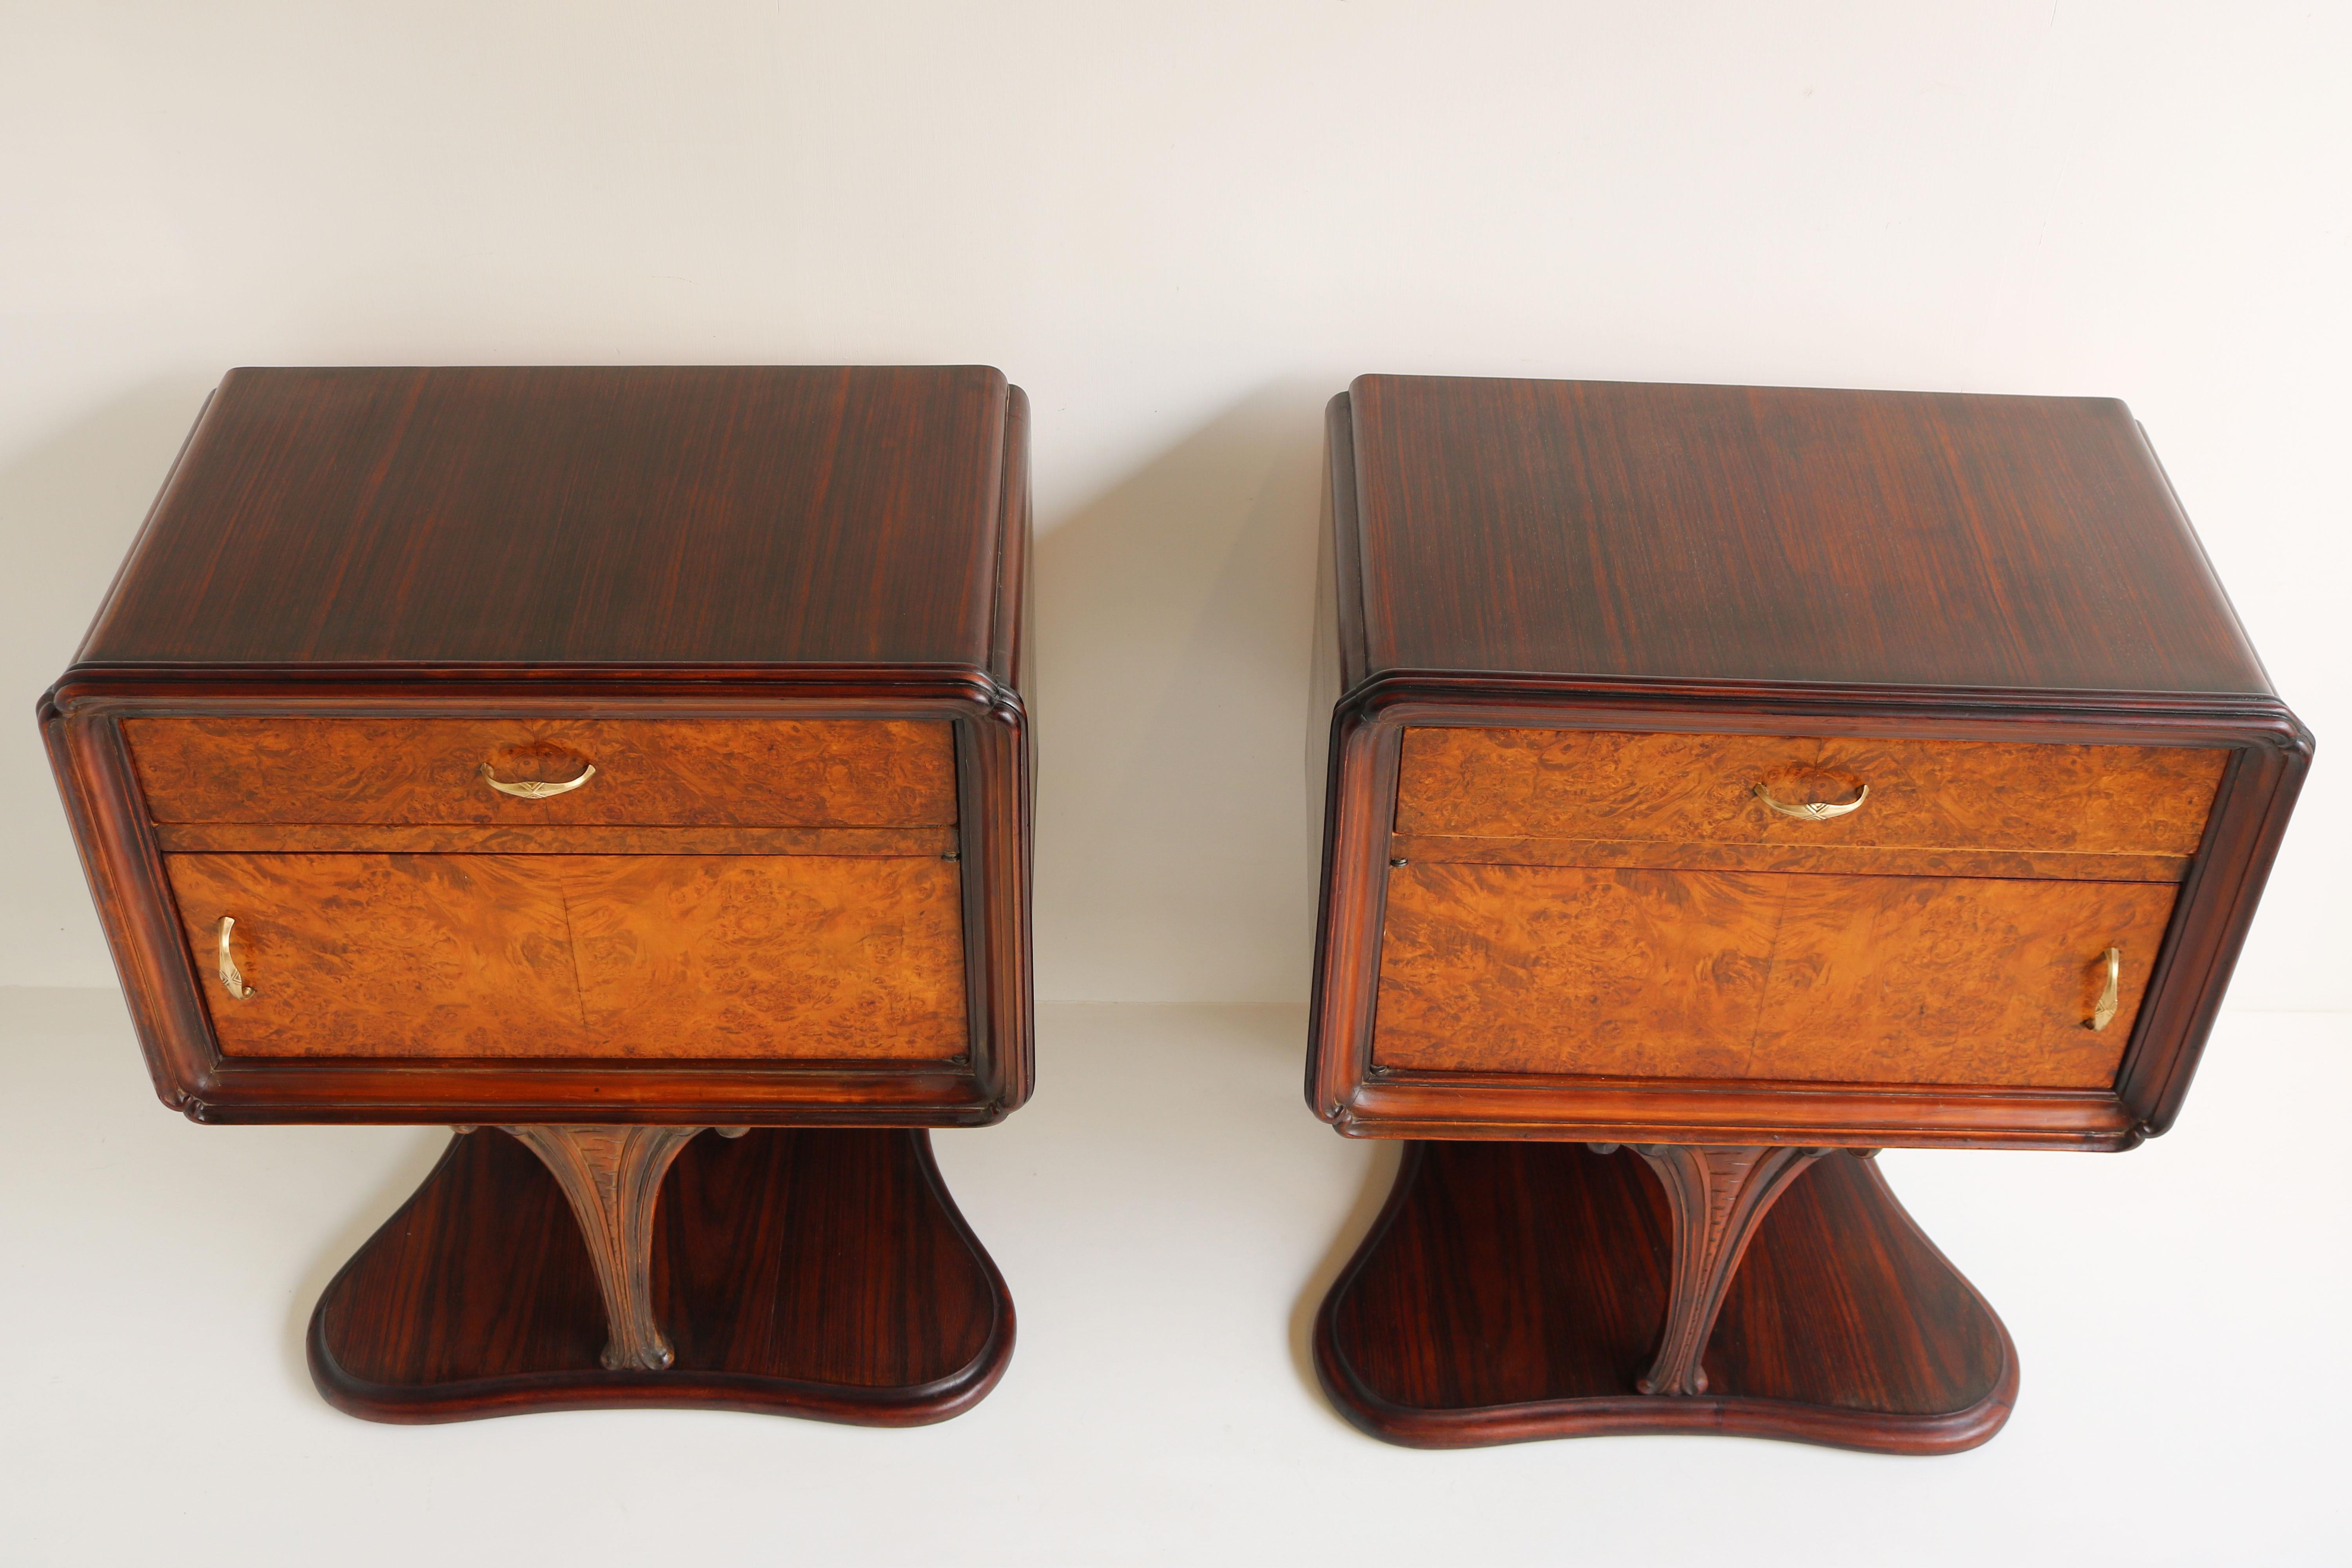 Mid-20th Century Pair of Italian Art Deco Night Stands / Bedside Tables in Rosewood & Walnut Burl